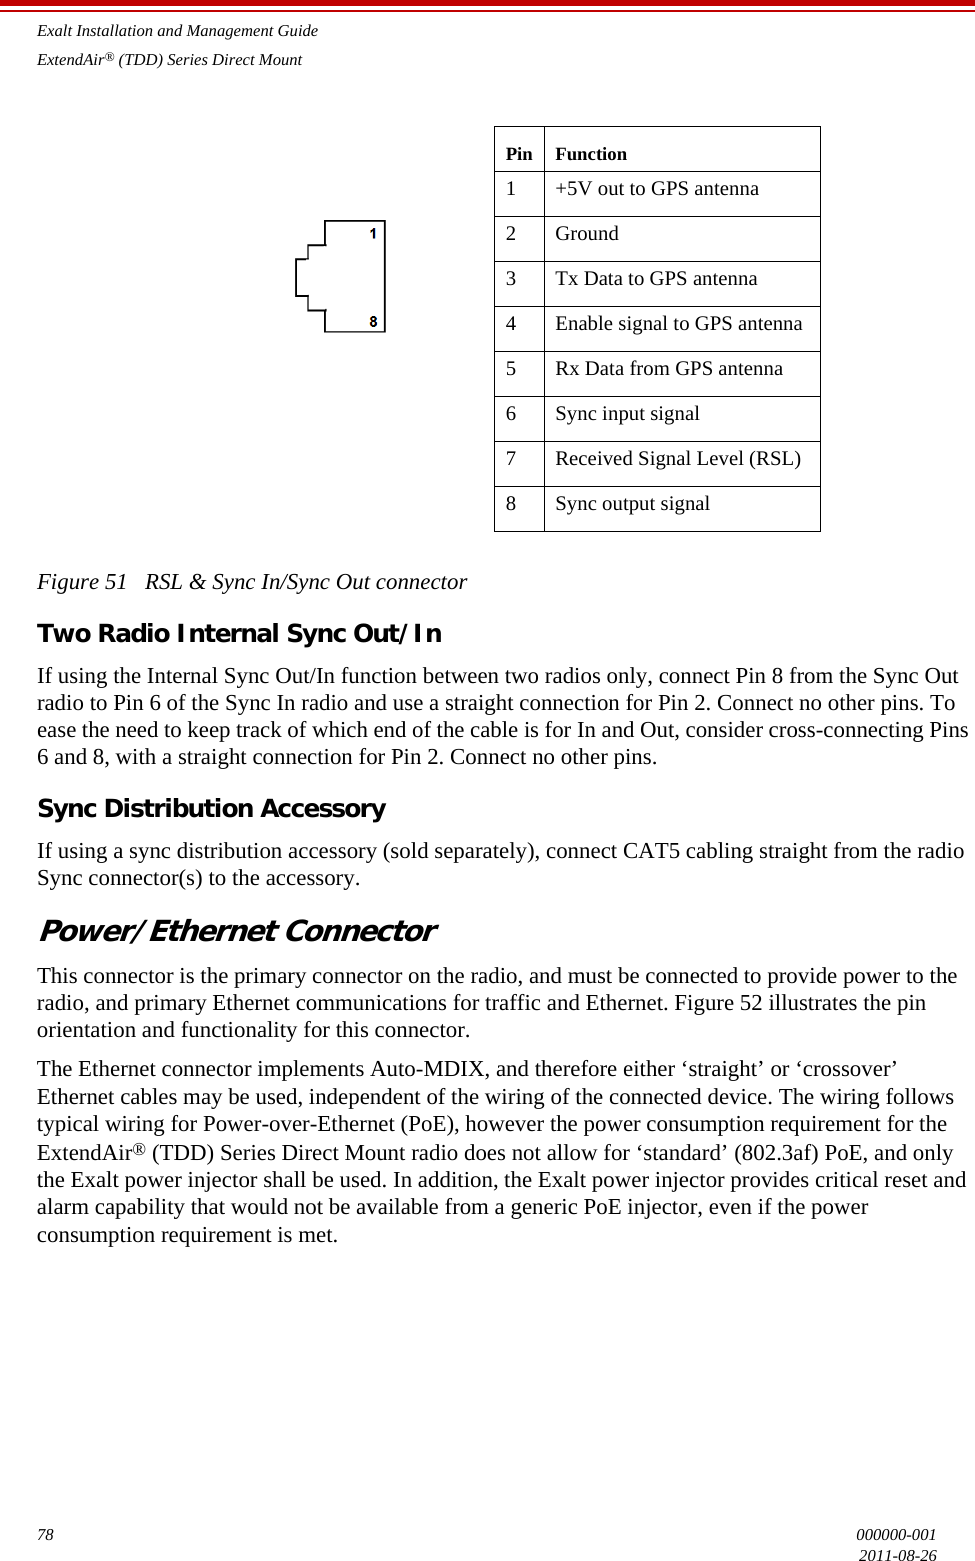 Exalt Installation and Management GuideExtendAir® (TDD) Series Direct Mount78 000000-0012011-08-26Figure 51   RSL &amp; Sync In/Sync Out connectorTwo Radio Internal Sync Out/InIf using the Internal Sync Out/In function between two radios only, connect Pin 8 from the Sync Out radio to Pin 6 of the Sync In radio and use a straight connection for Pin 2. Connect no other pins. To ease the need to keep track of which end of the cable is for In and Out, consider cross-connecting Pins 6 and 8, with a straight connection for Pin 2. Connect no other pins.Sync Distribution AccessoryIf using a sync distribution accessory (sold separately), connect CAT5 cabling straight from the radio Sync connector(s) to the accessory.Power/Ethernet ConnectorThis connector is the primary connector on the radio, and must be connected to provide power to the radio, and primary Ethernet communications for traffic and Ethernet. Figure 52 illustrates the pin orientation and functionality for this connector.The Ethernet connector implements Auto-MDIX, and therefore either ‘straight’ or ‘crossover’ Ethernet cables may be used, independent of the wiring of the connected device. The wiring follows typical wiring for Power-over-Ethernet (PoE), however the power consumption requirement for the ExtendAir® (TDD) Series Direct Mount radio does not allow for ‘standard’ (802.3af) PoE, and only the Exalt power injector shall be used. In addition, the Exalt power injector provides critical reset and alarm capability that would not be available from a generic PoE injector, even if the power consumption requirement is met.Pin Function1 +5V out to GPS antenna2Ground3 Tx Data to GPS antenna4 Enable signal to GPS antenna5 Rx Data from GPS antenna6 Sync input signal7 Received Signal Level (RSL)8 Sync output signal